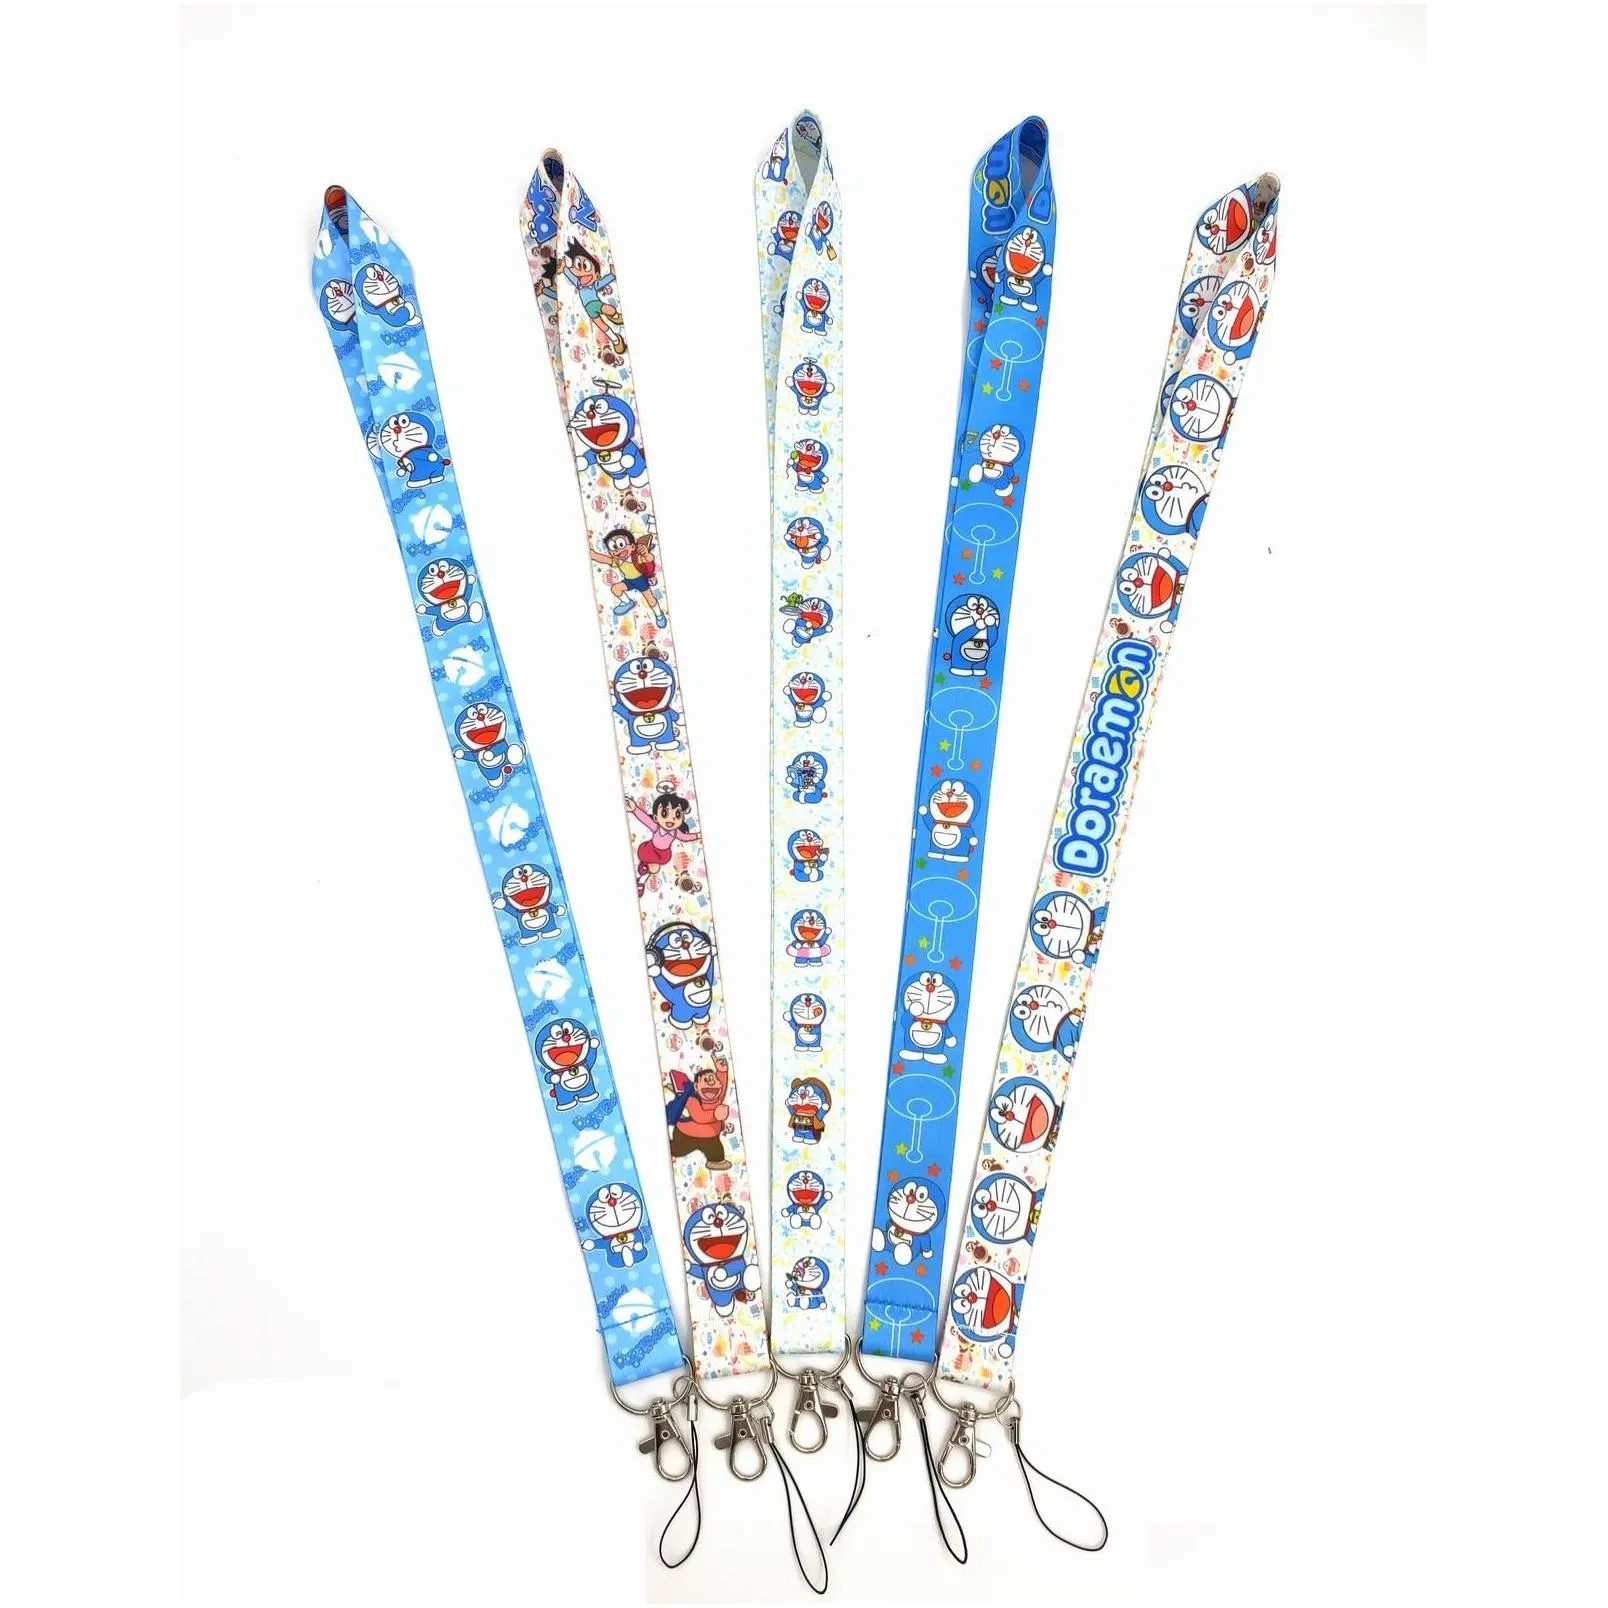 factory price 100 piec doraemon anime lanyard keychain neck strap key camera id phone string pendant badge party gift accessories